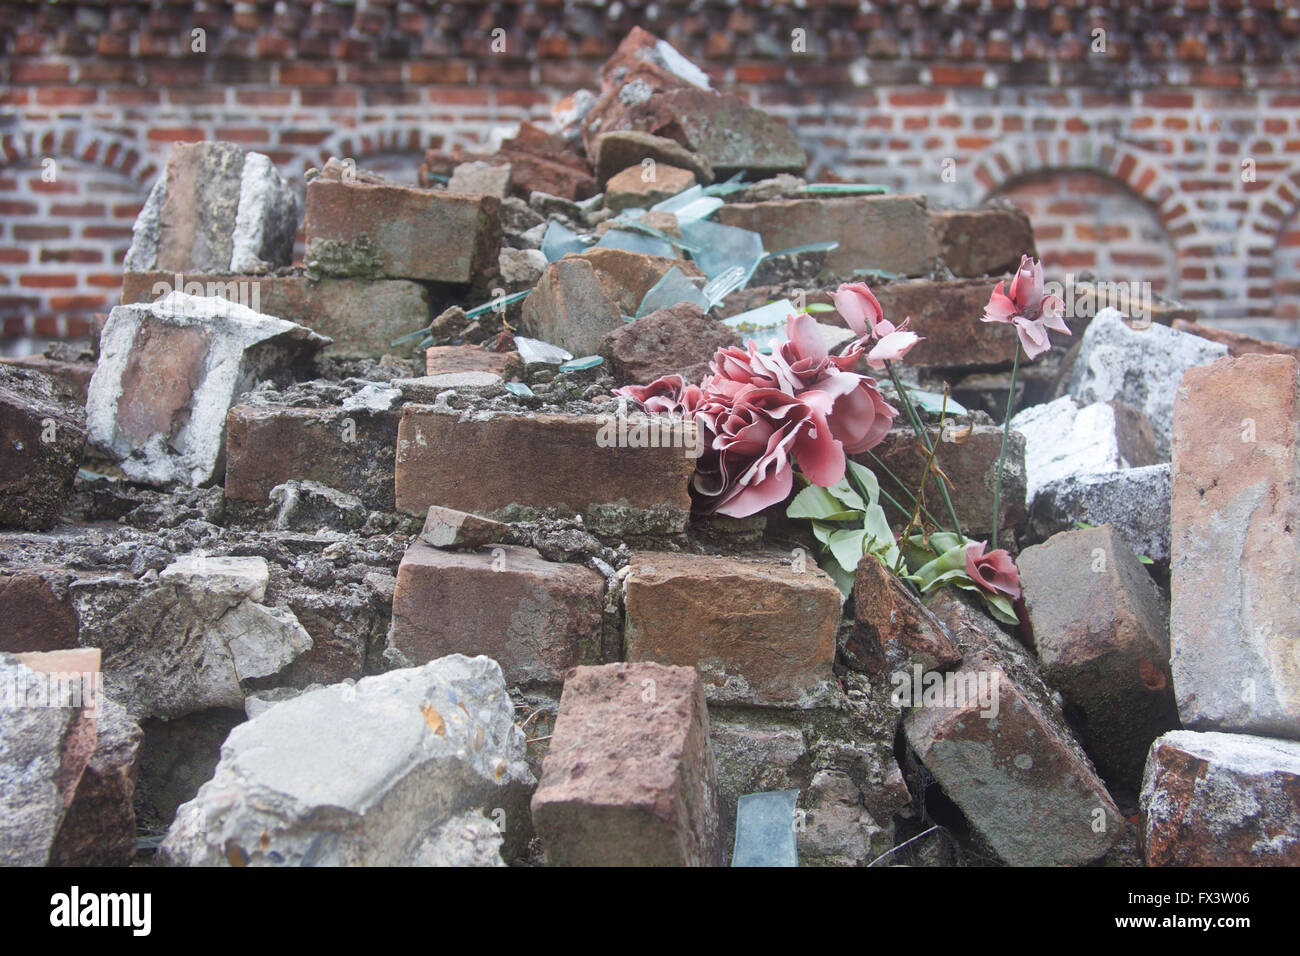 Destroyed, crumbled tomb, with faded flower, from a cemetery in New Orleans, Louisiana. Stock Photo